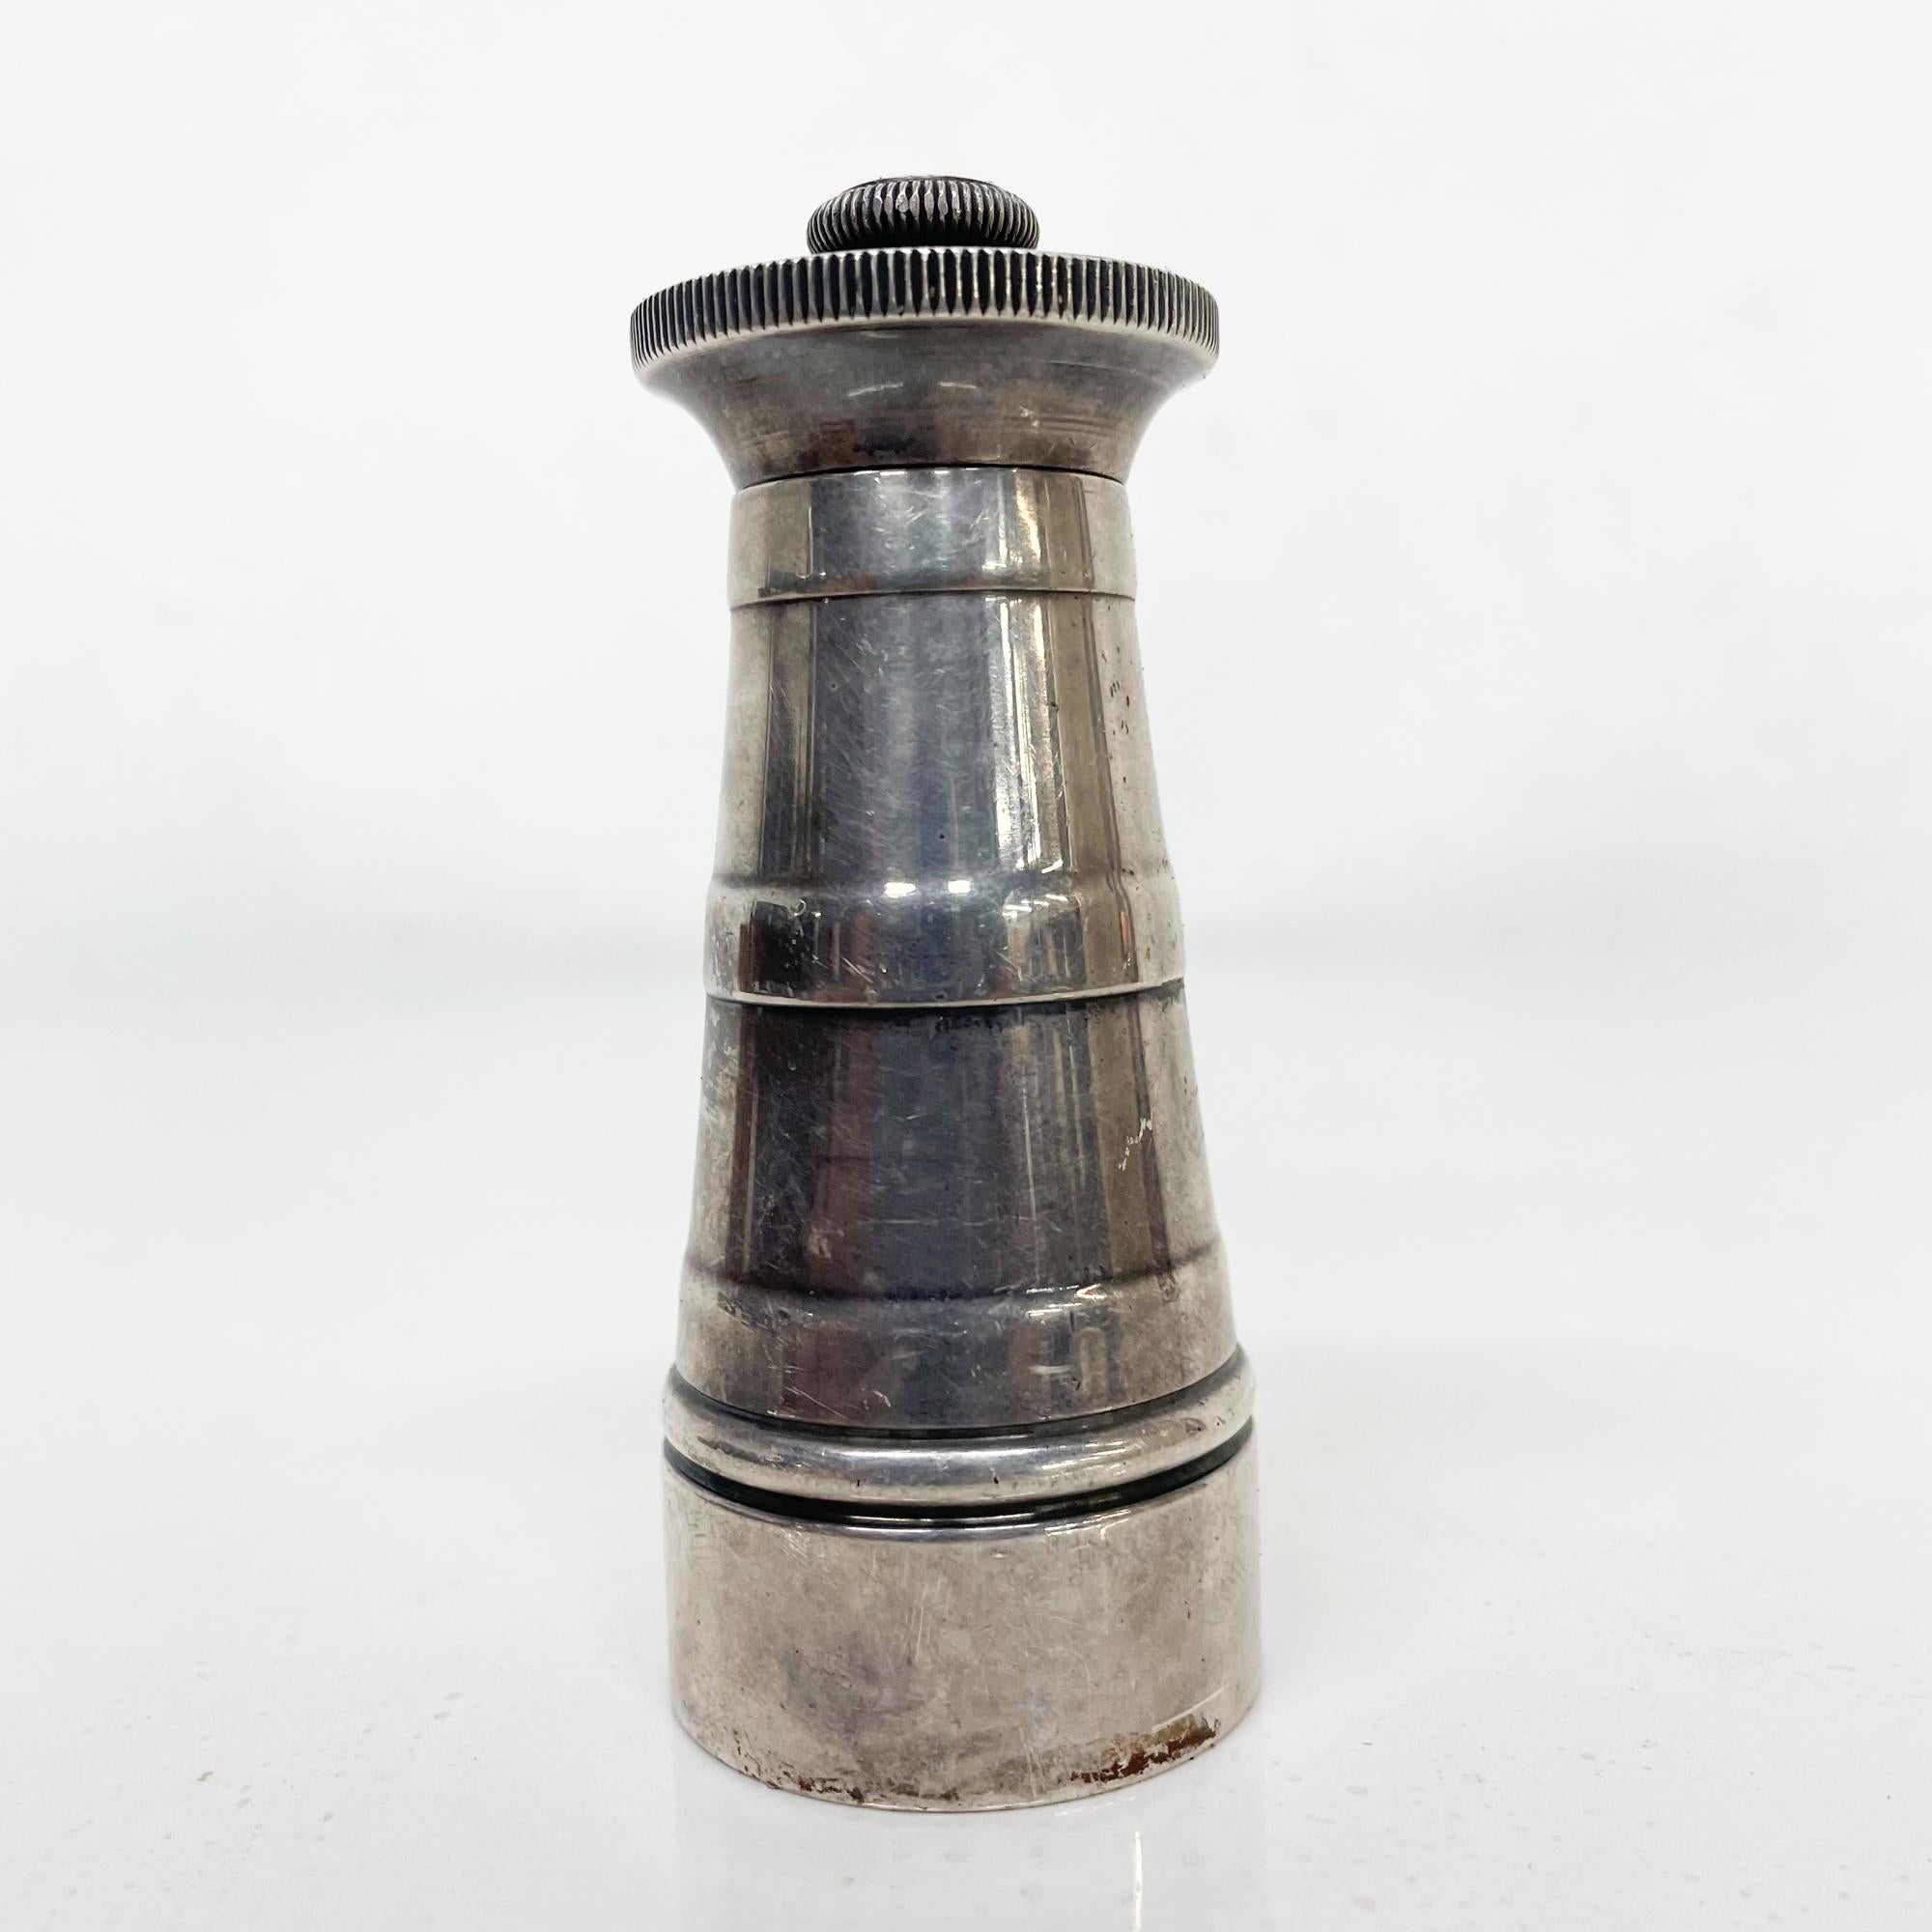 Striking Modernism by British PARK GREEN & CO LTD pepper Mill Grinder
Appears as silver plated
Made in England by Parker & Green co LTD3.25 tall x 1.63 in diameter inches
Original unrestored vintage condition. Tested and working. 
Review